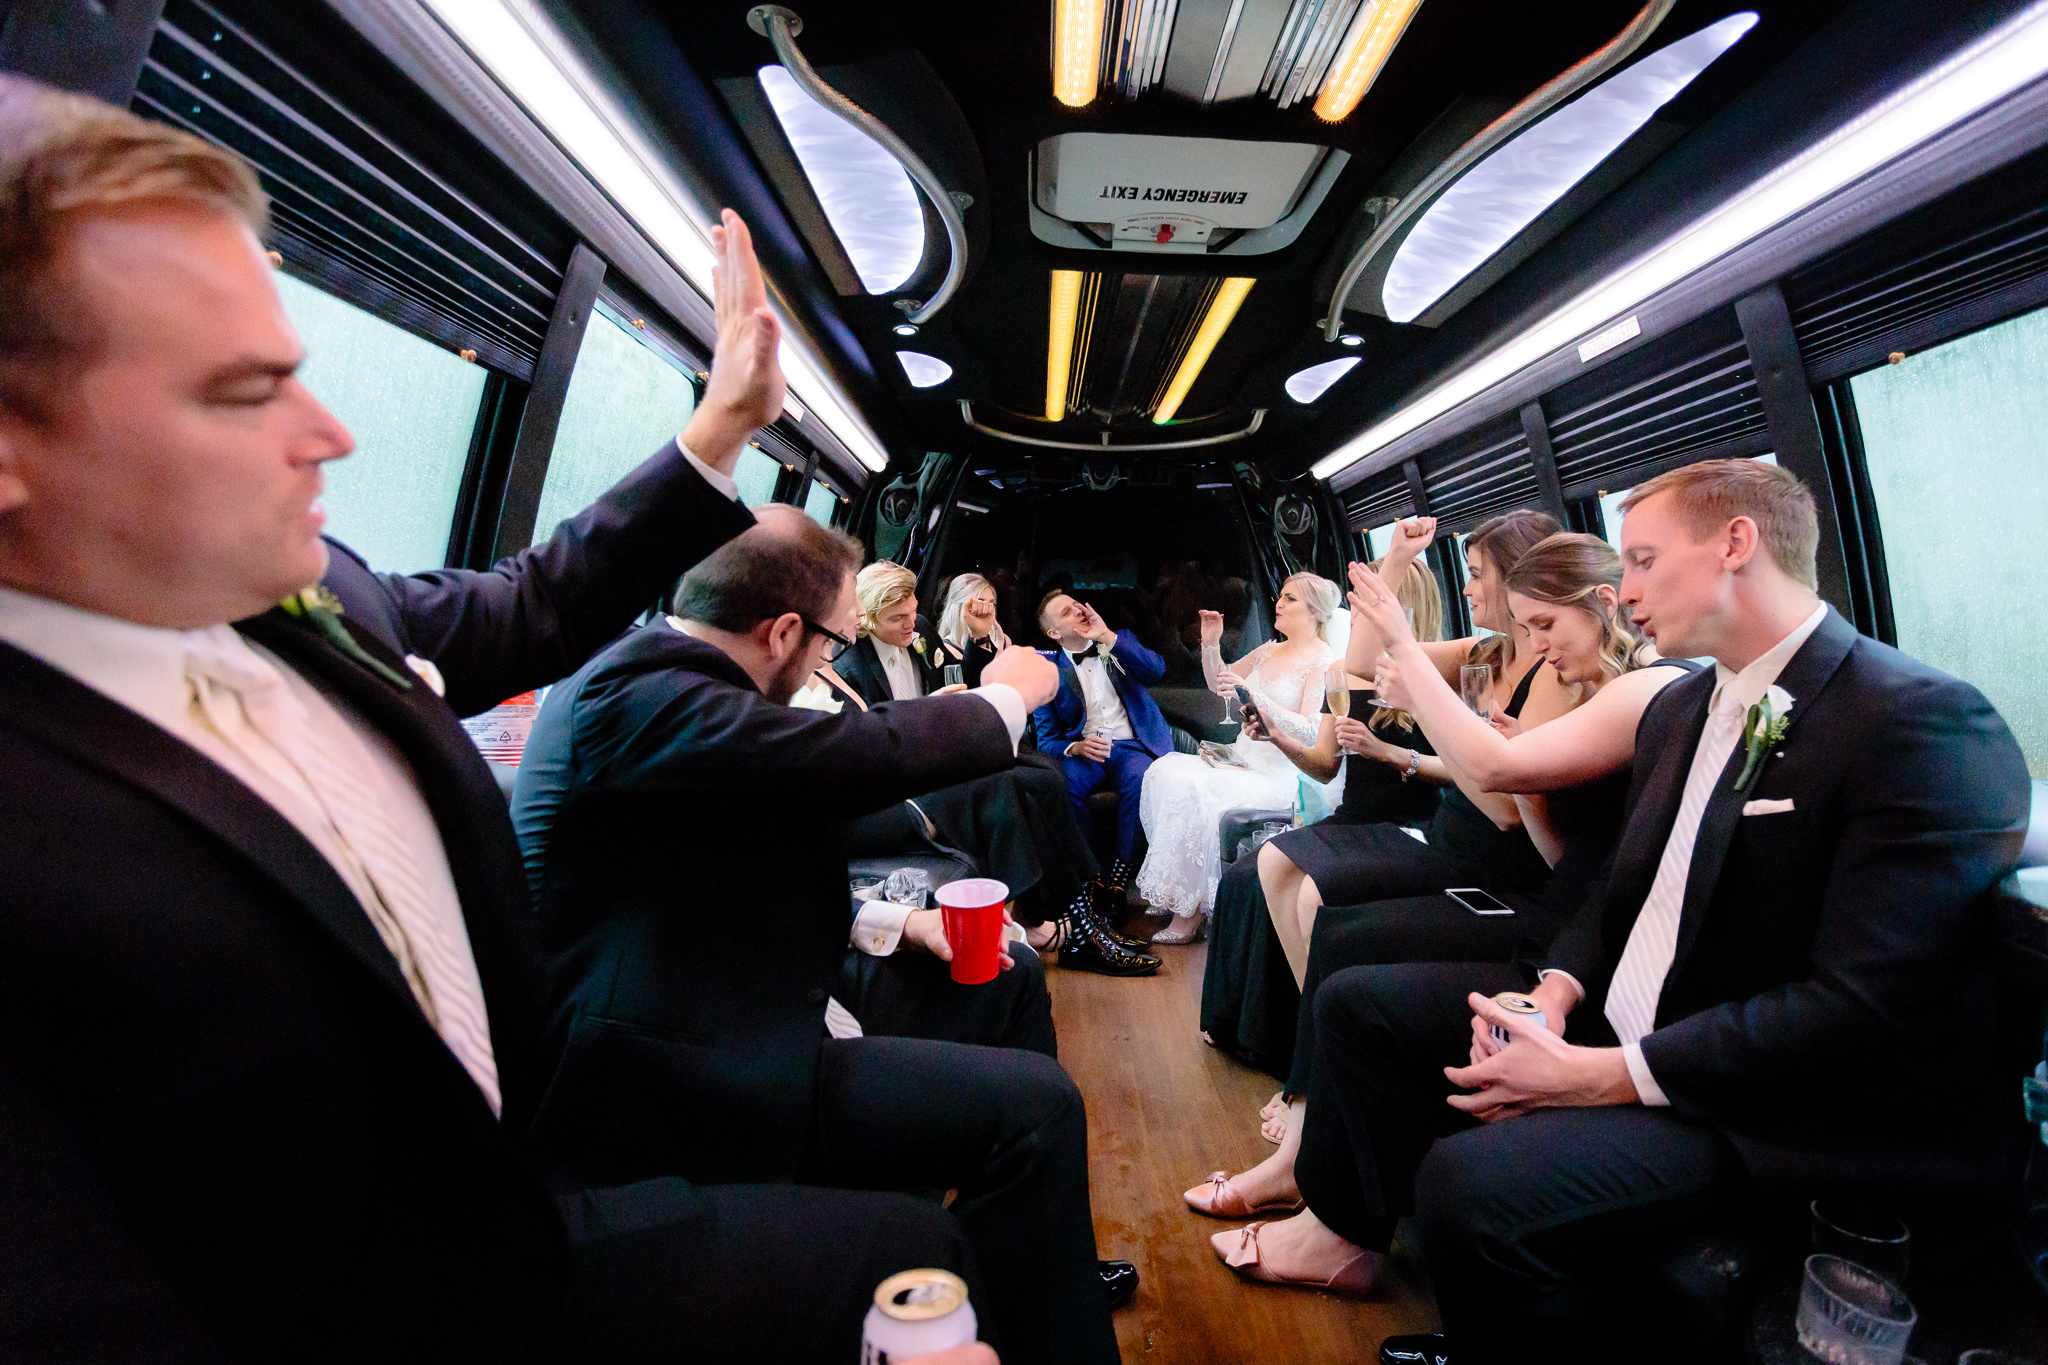 Bridal party sings on the limo ride to a Soldiers & Sailors wedding